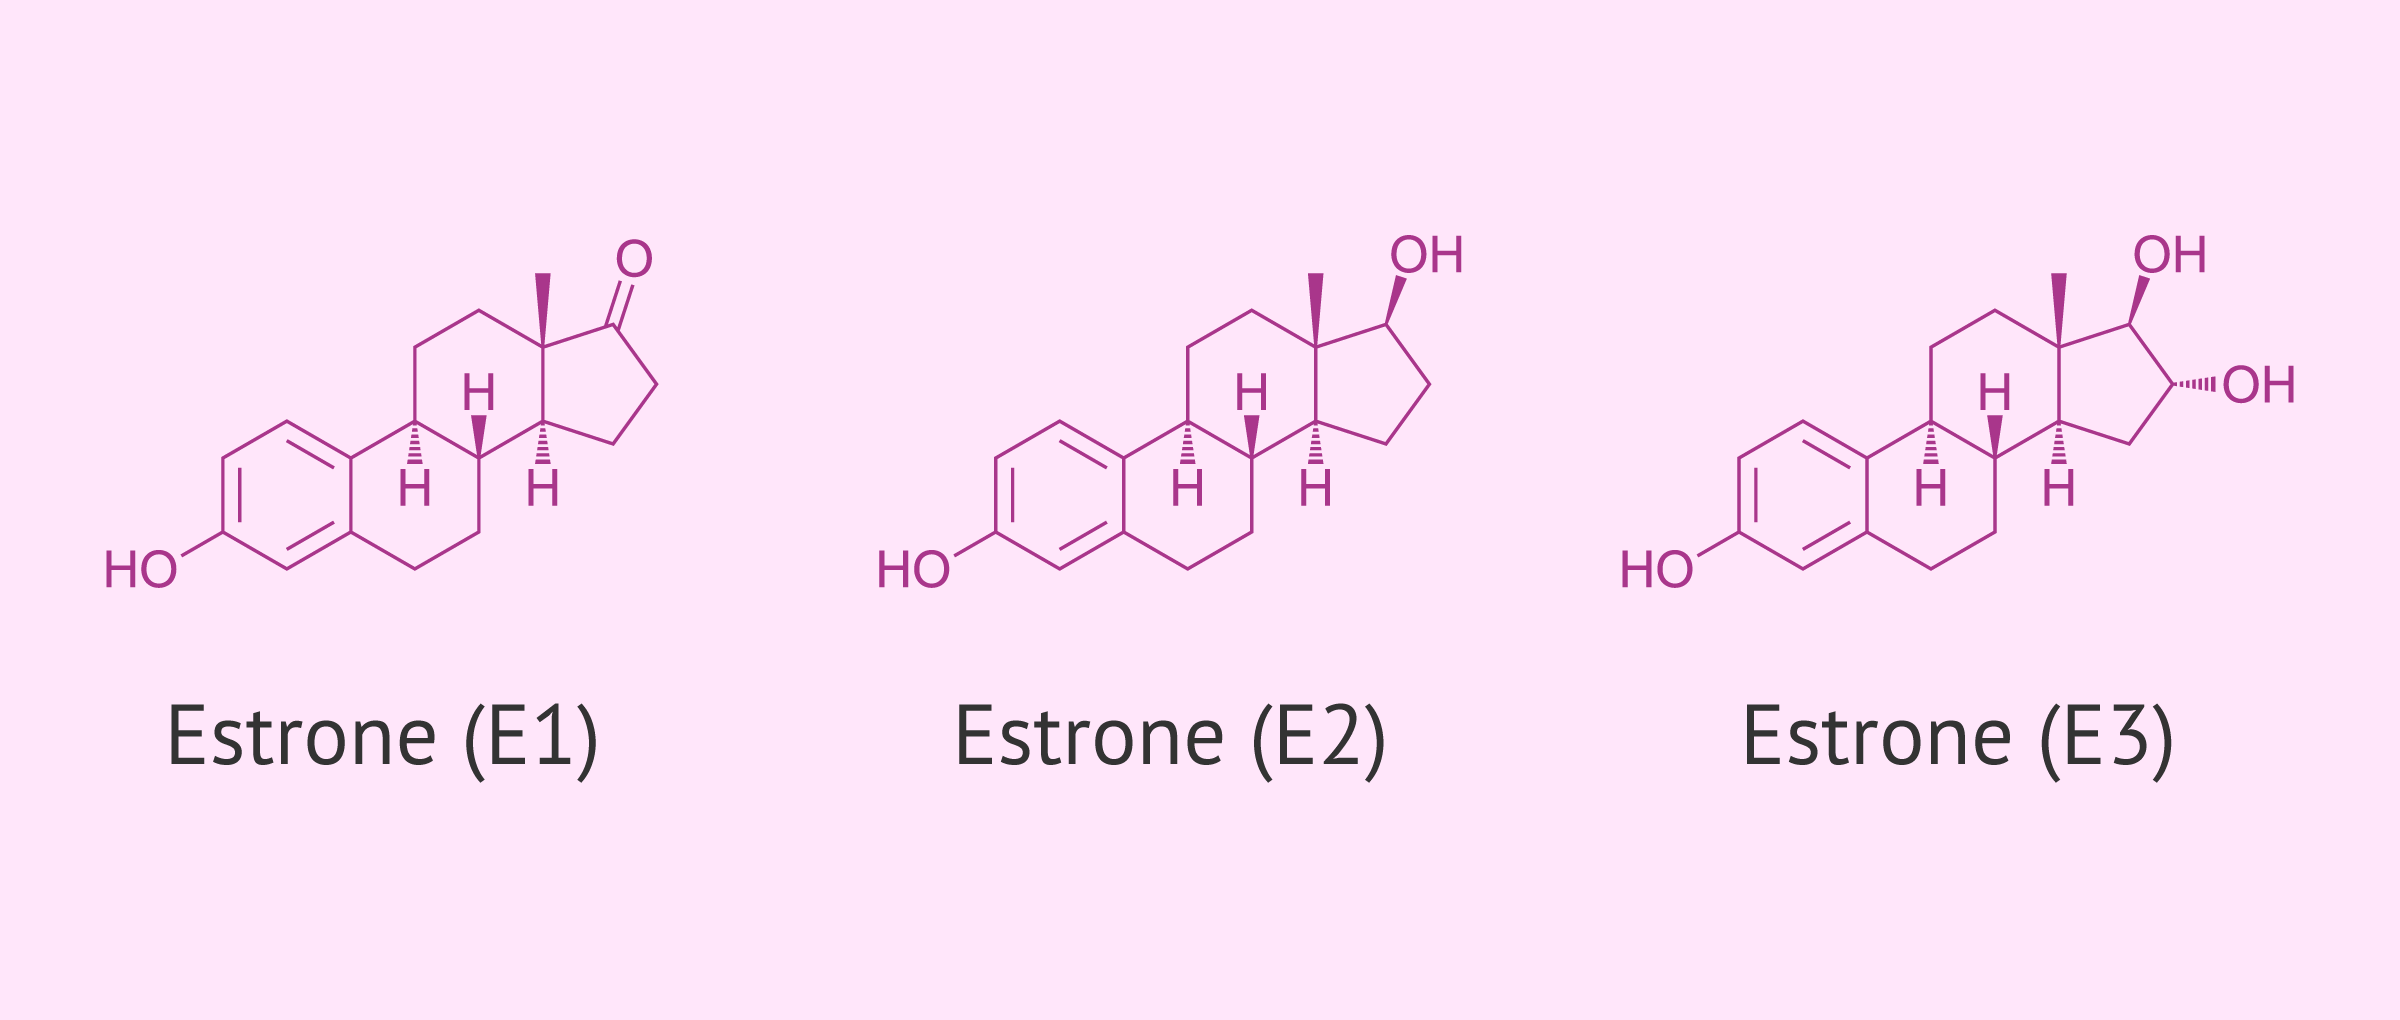 Names of the different types of estrogens